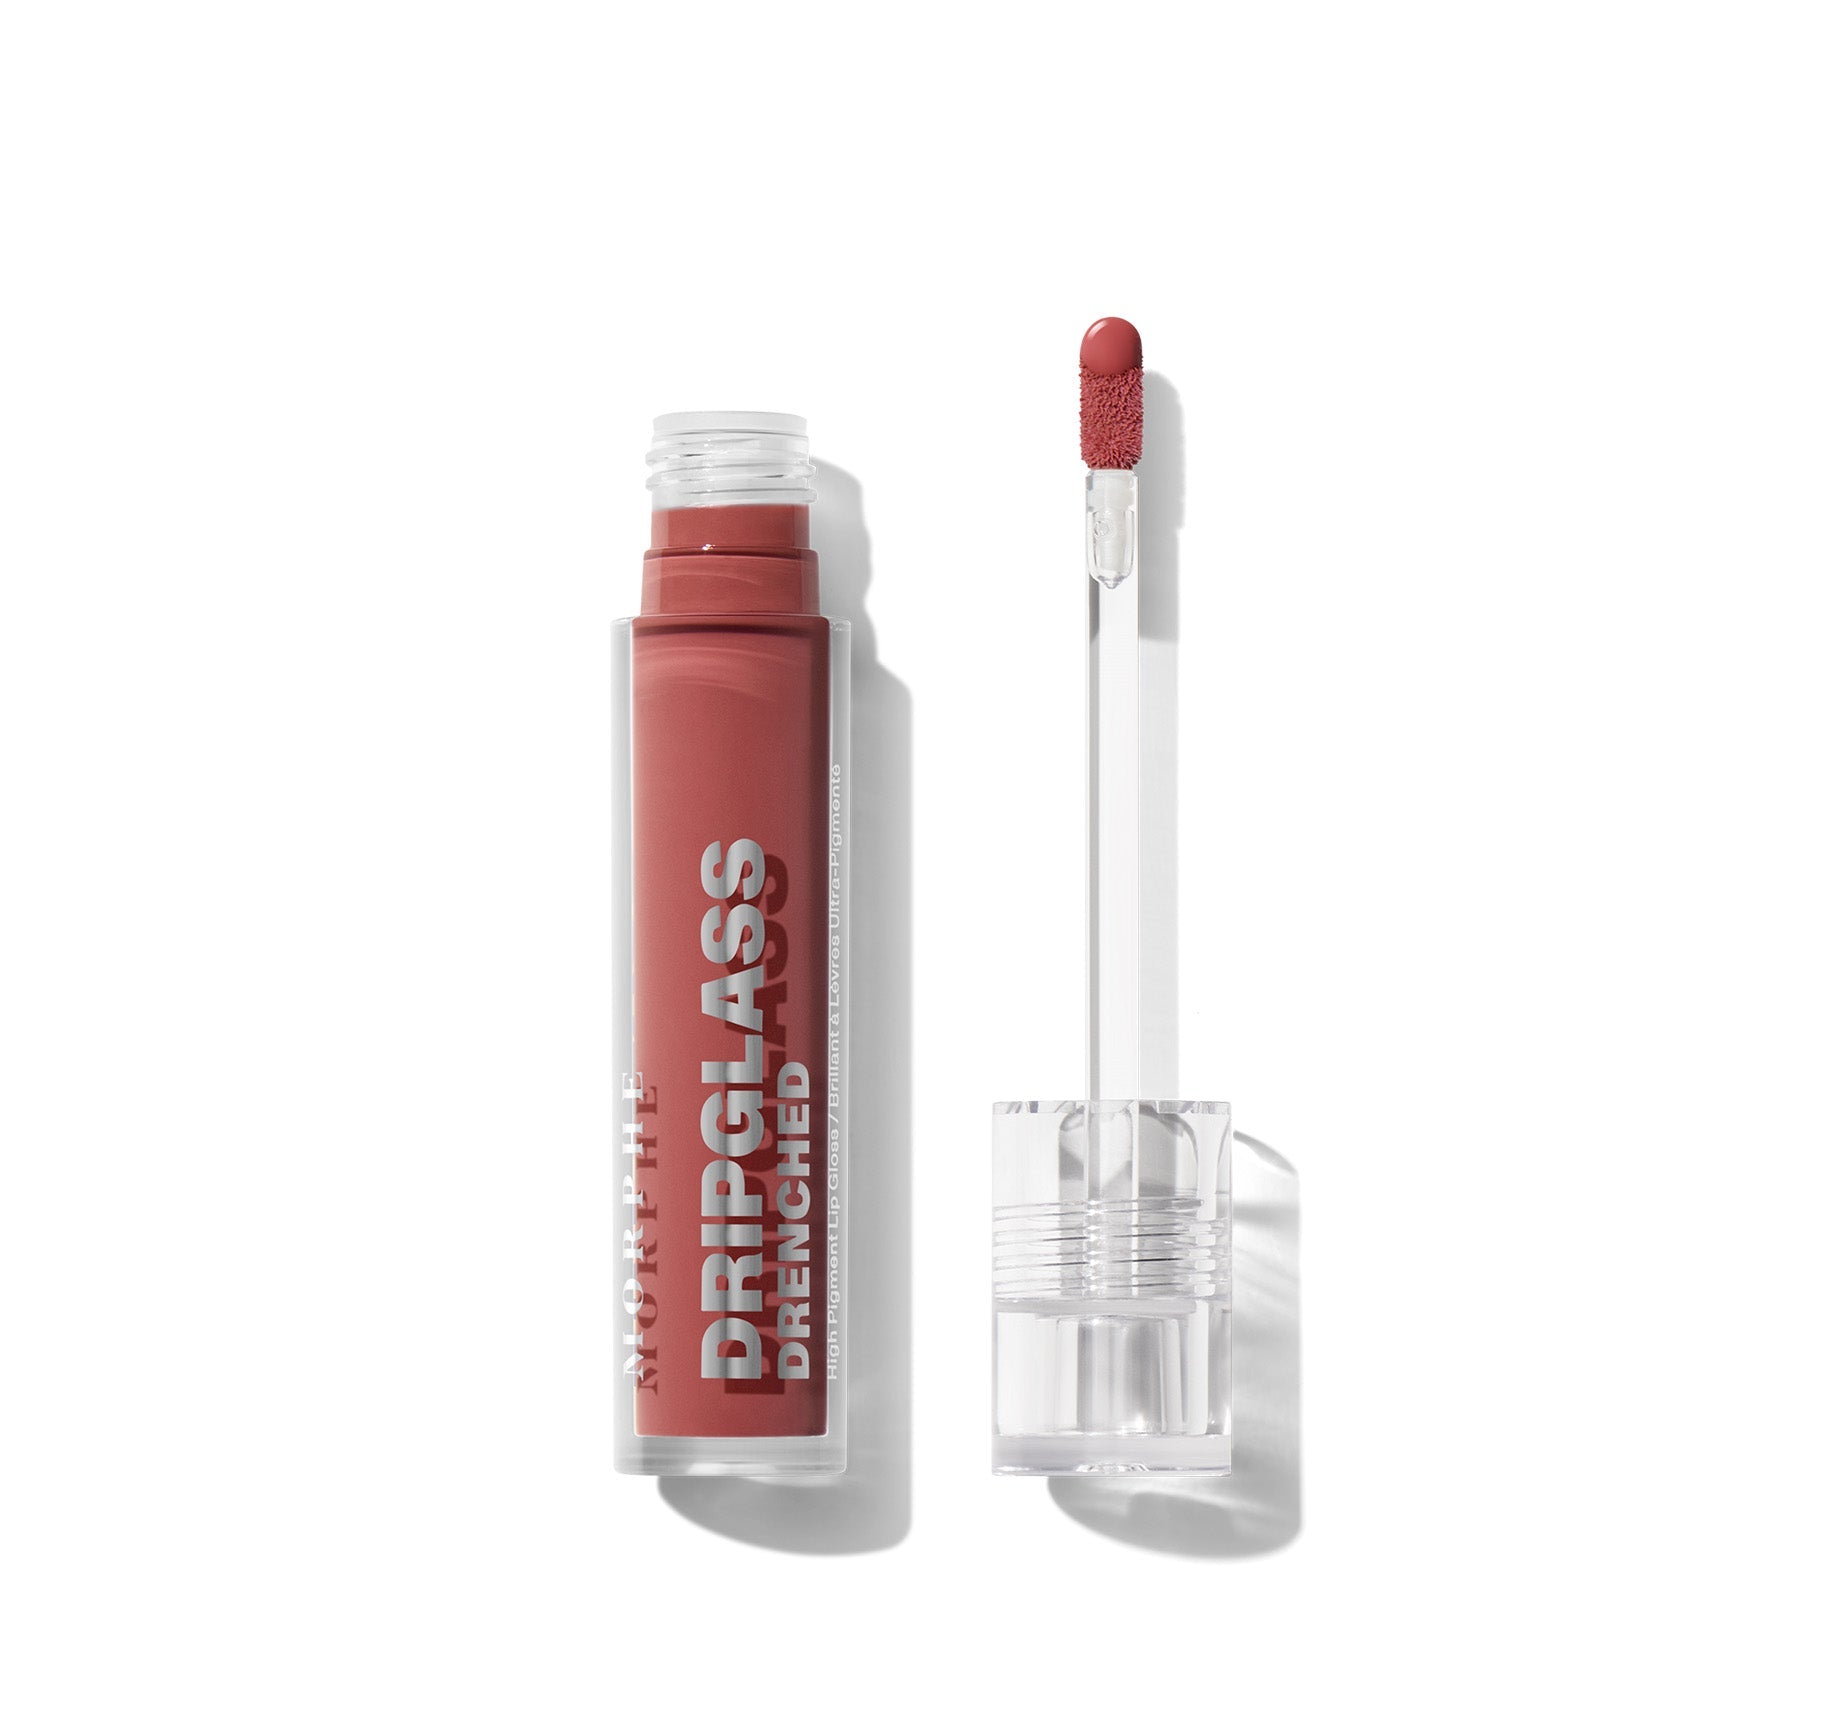 Dripglass Drenched High Pigment Lip Gloss - Deep Brick - Image 1